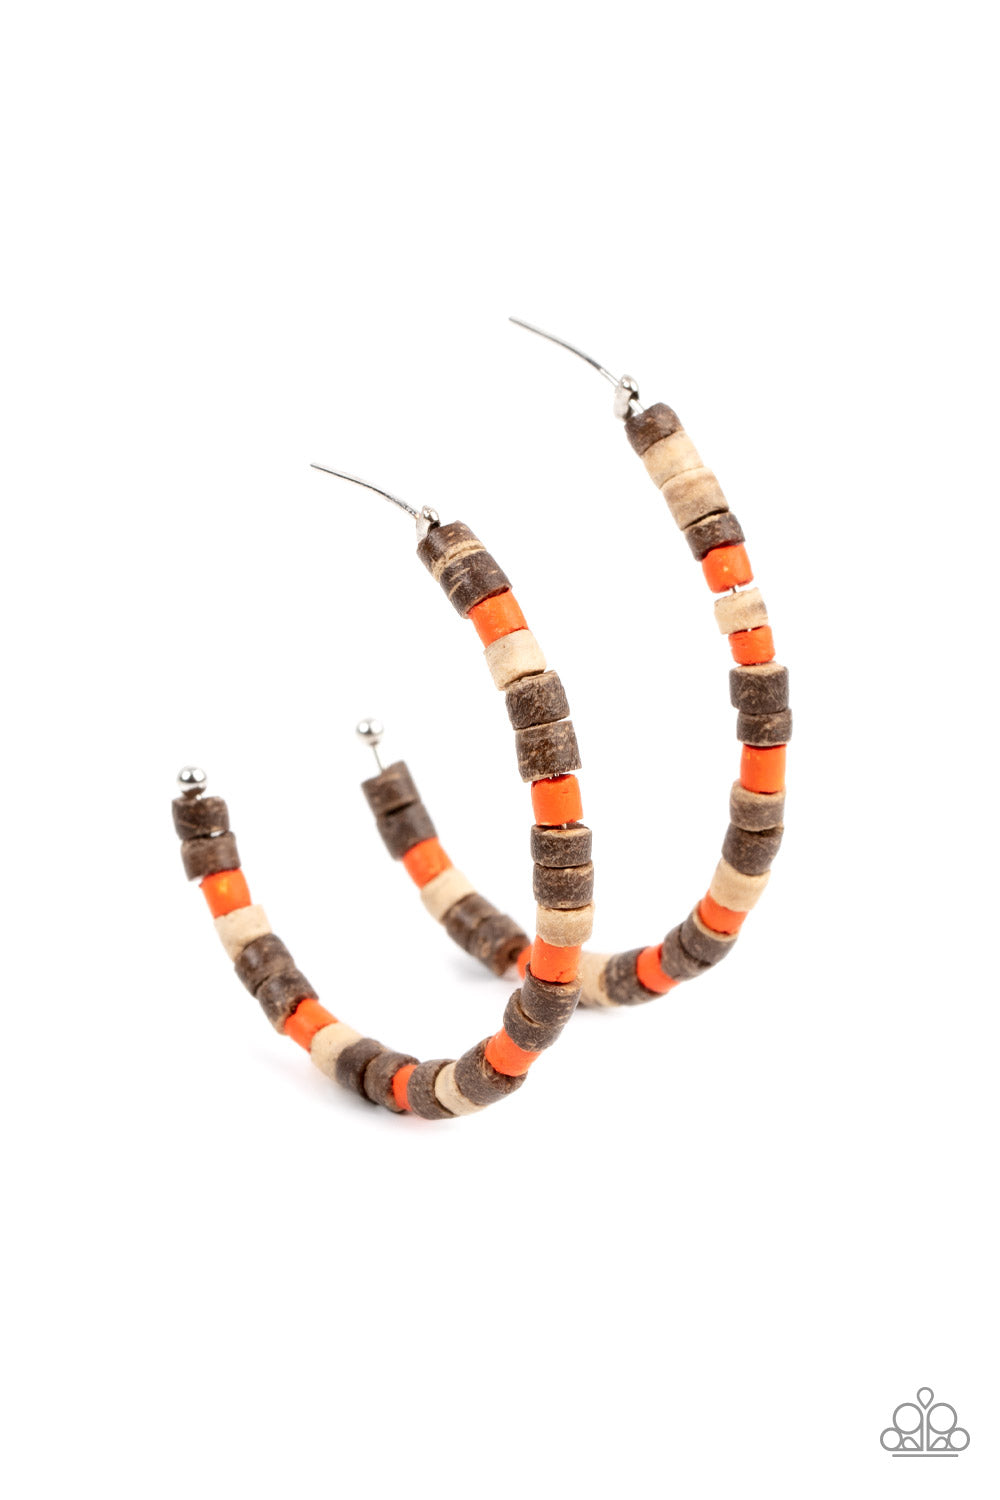 Effortlessly Earthy Orange Hoop Earring - Paparazzi Accessories  An earthy assortment of orange and rustic wood beads are threaded along a classic silver hoop, resulting in an earthy centerpiece. Earring attaches to a standard post fitting. Hoop measures approximately 2" in diameter.  Sold as one pair of hoop earrings.